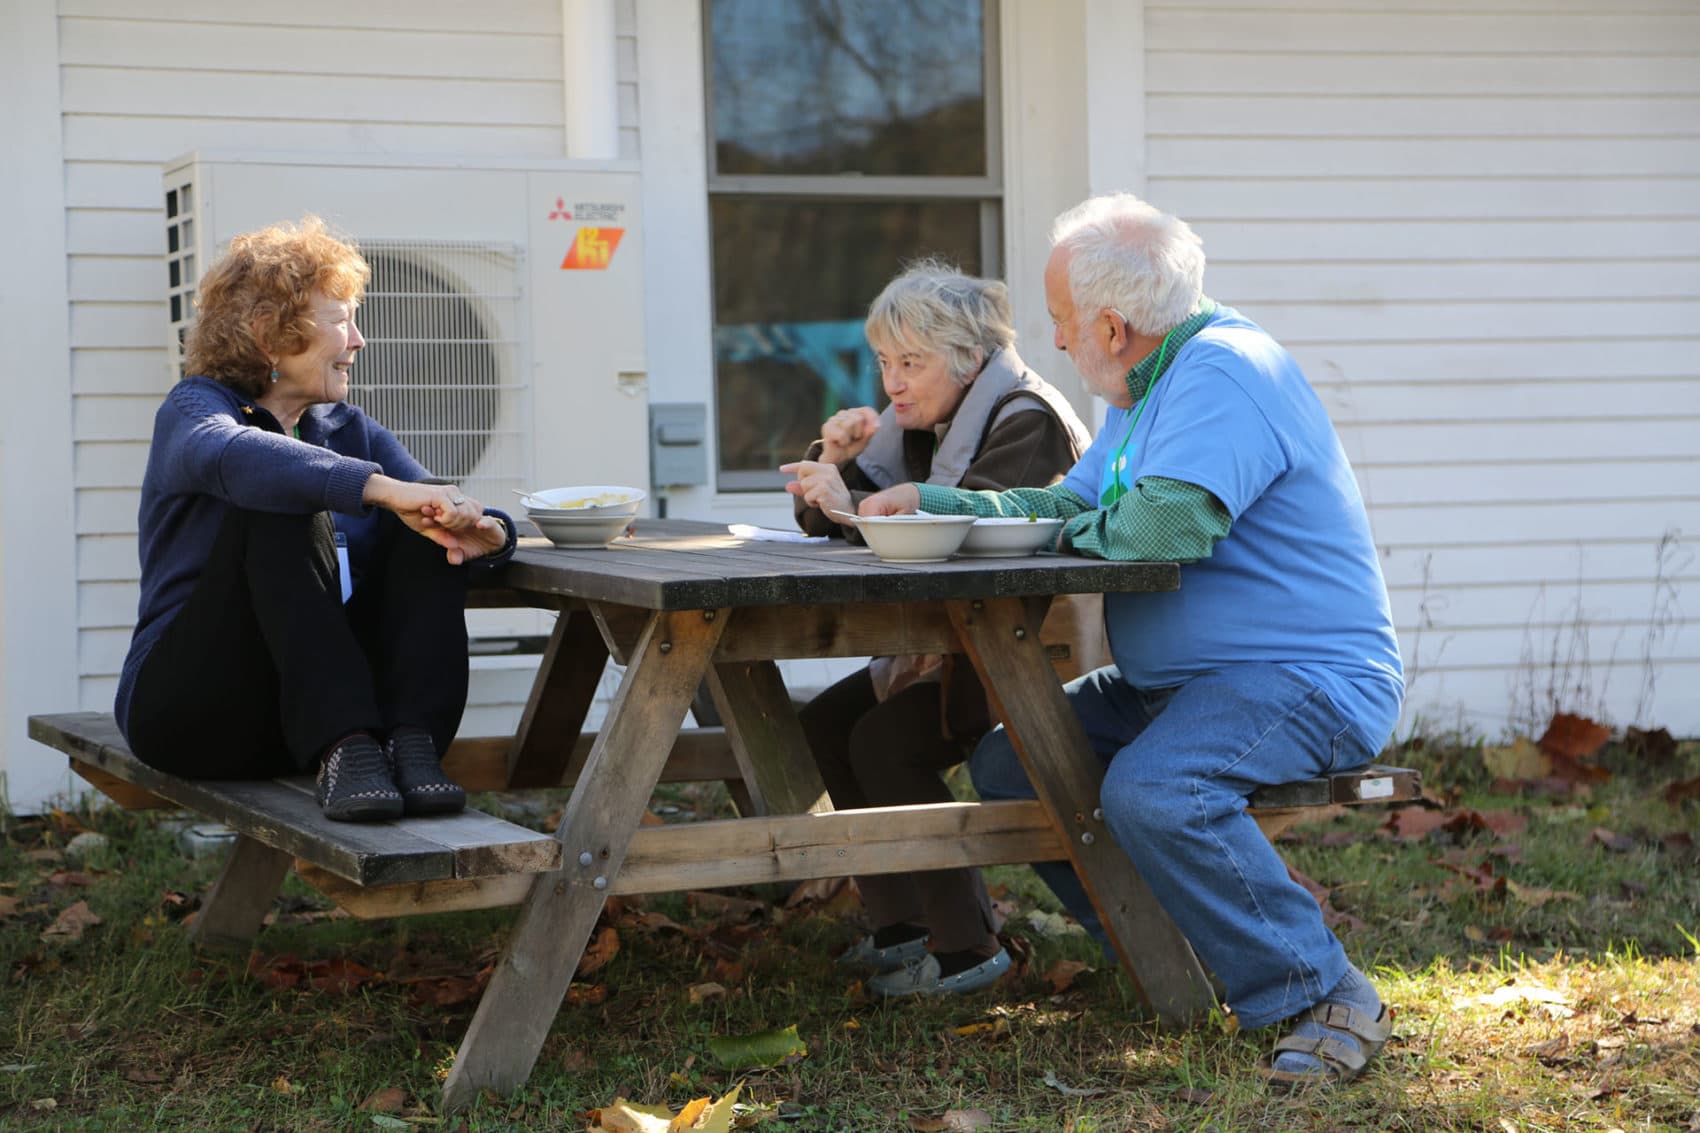 A few members of Hands Across the Hills take a break from a facilitated dialogue session in Leverett, Mass., in October 2017. (Garrison Greenleaf/Courtesy of Hands Across the Hills)